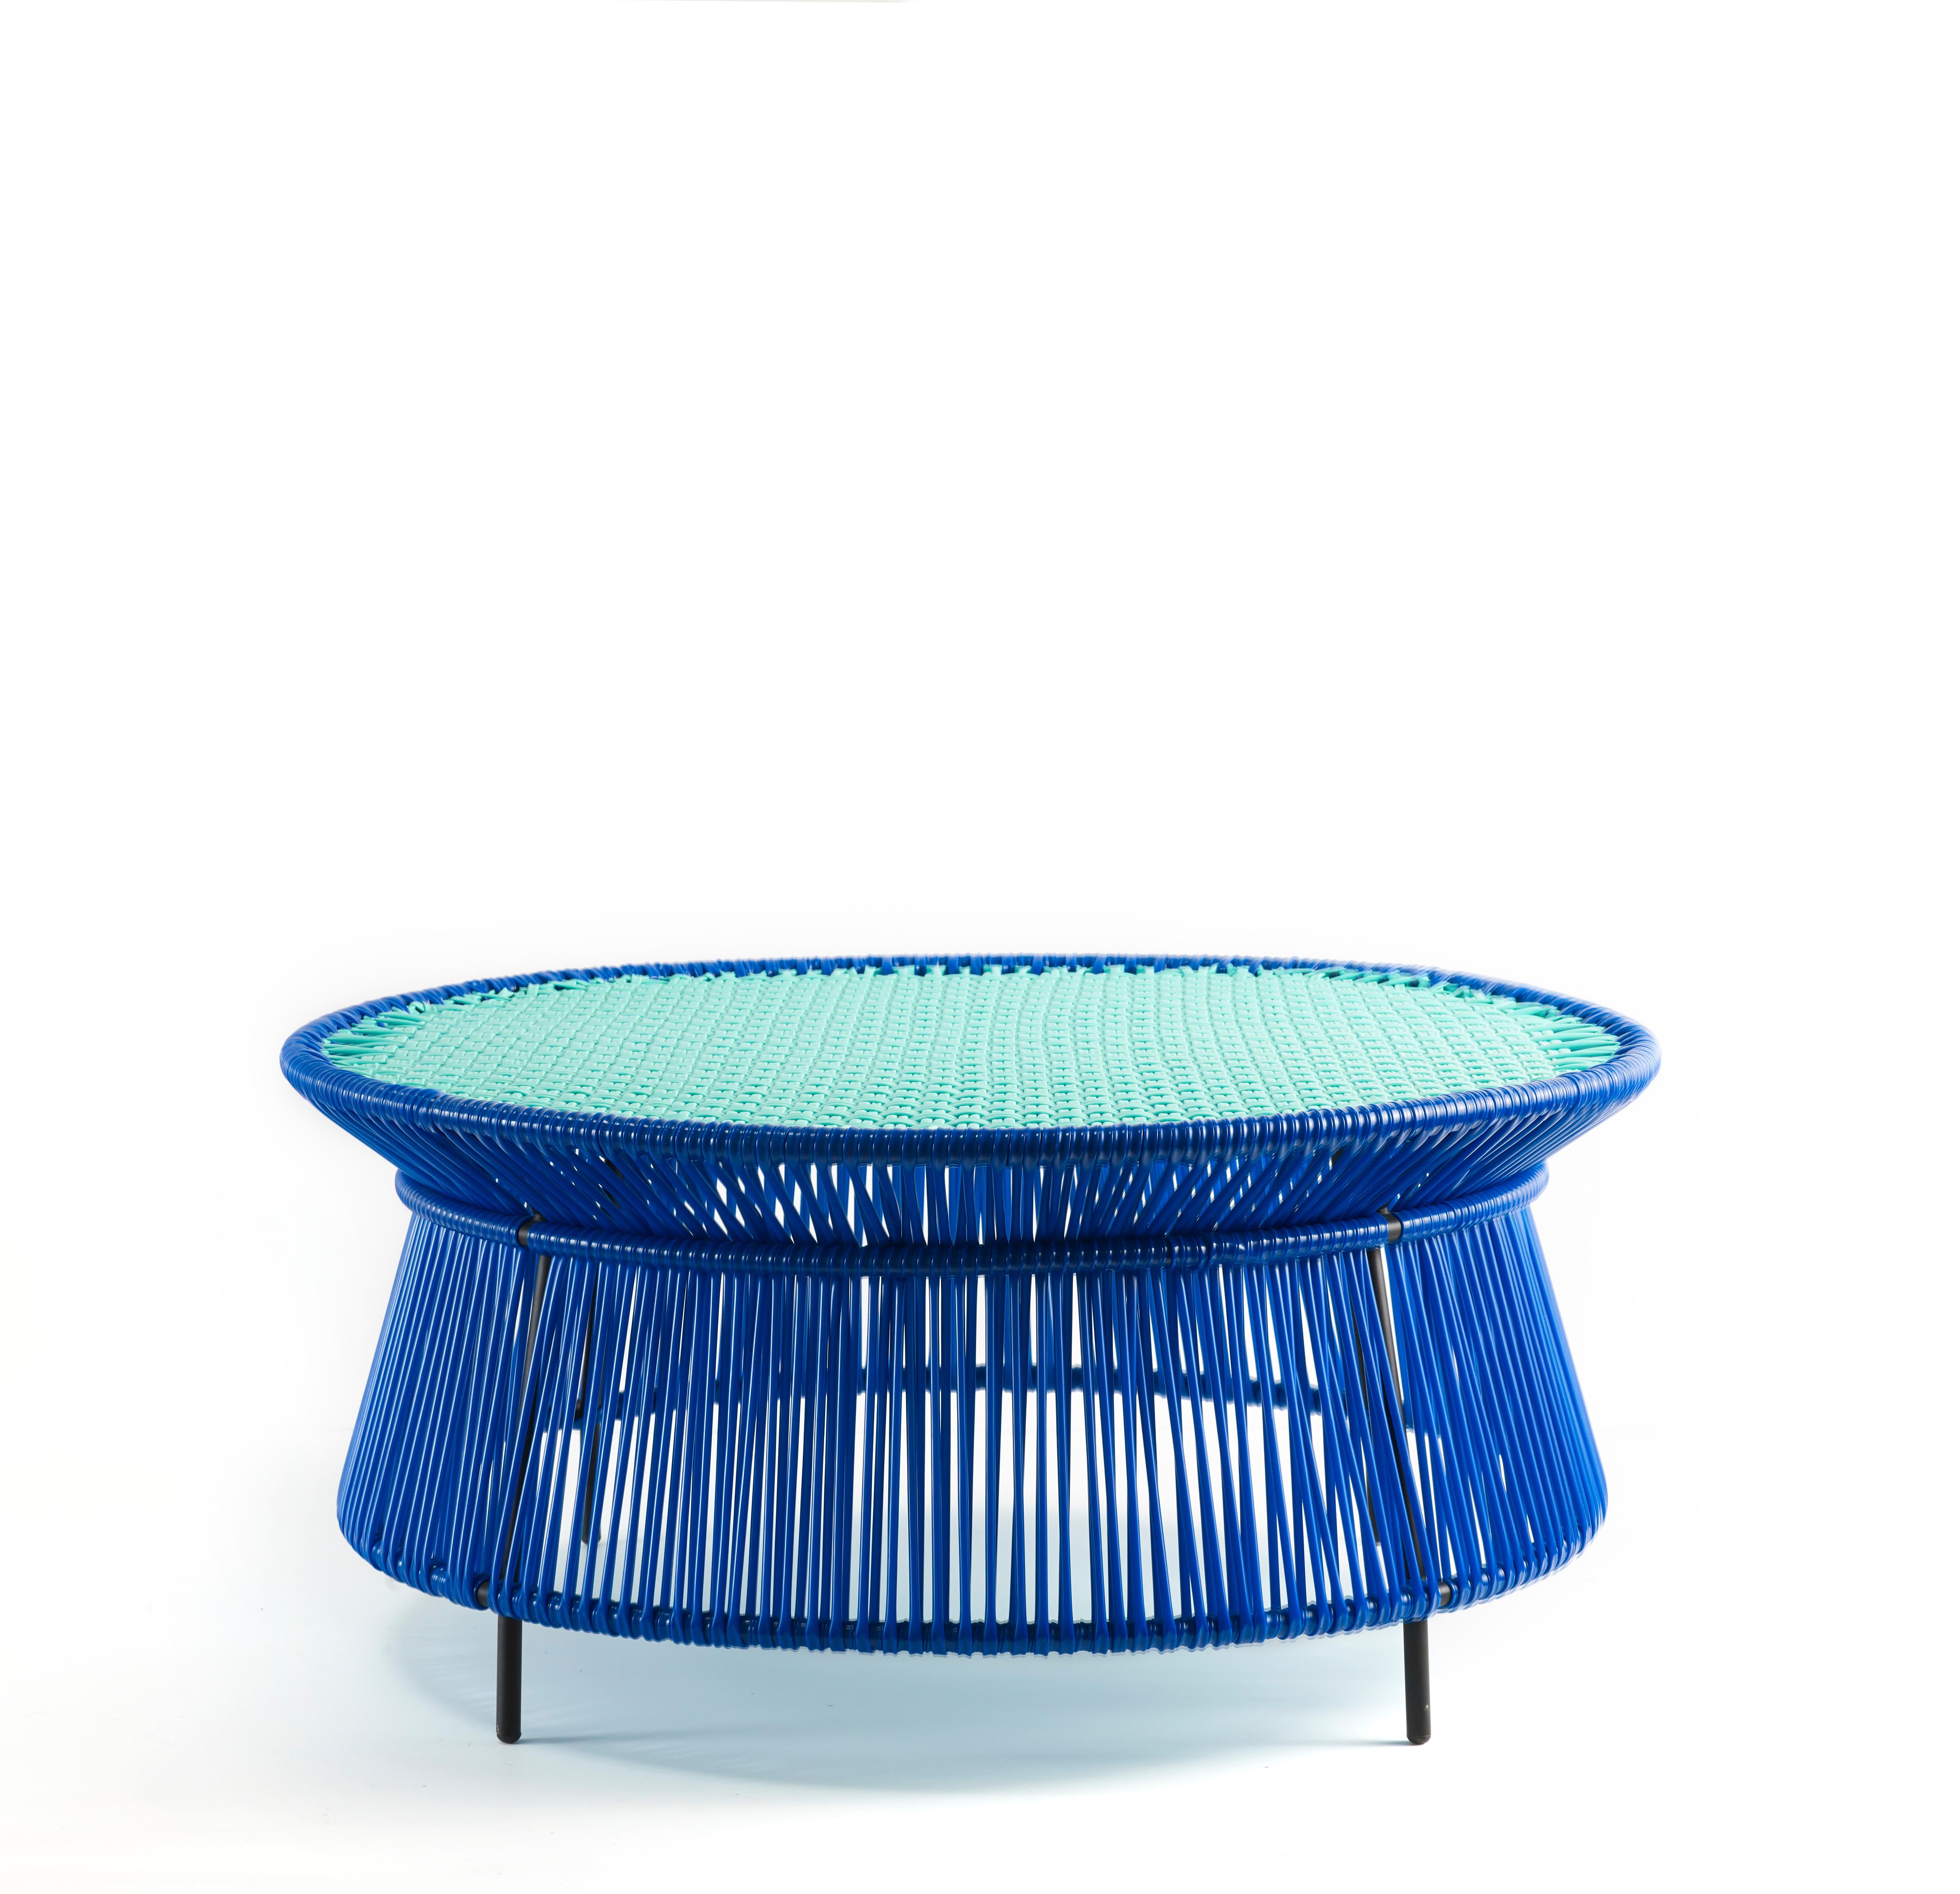 Blue Caribe low table by Sebastian Herkner
Materials: Galvanized and powder-coated tubular steel. PVC strings are made from recycled plastic.
Technique: Made from recycled plastic and weaved by local craftspeople in Colombia. 
Dimensions: